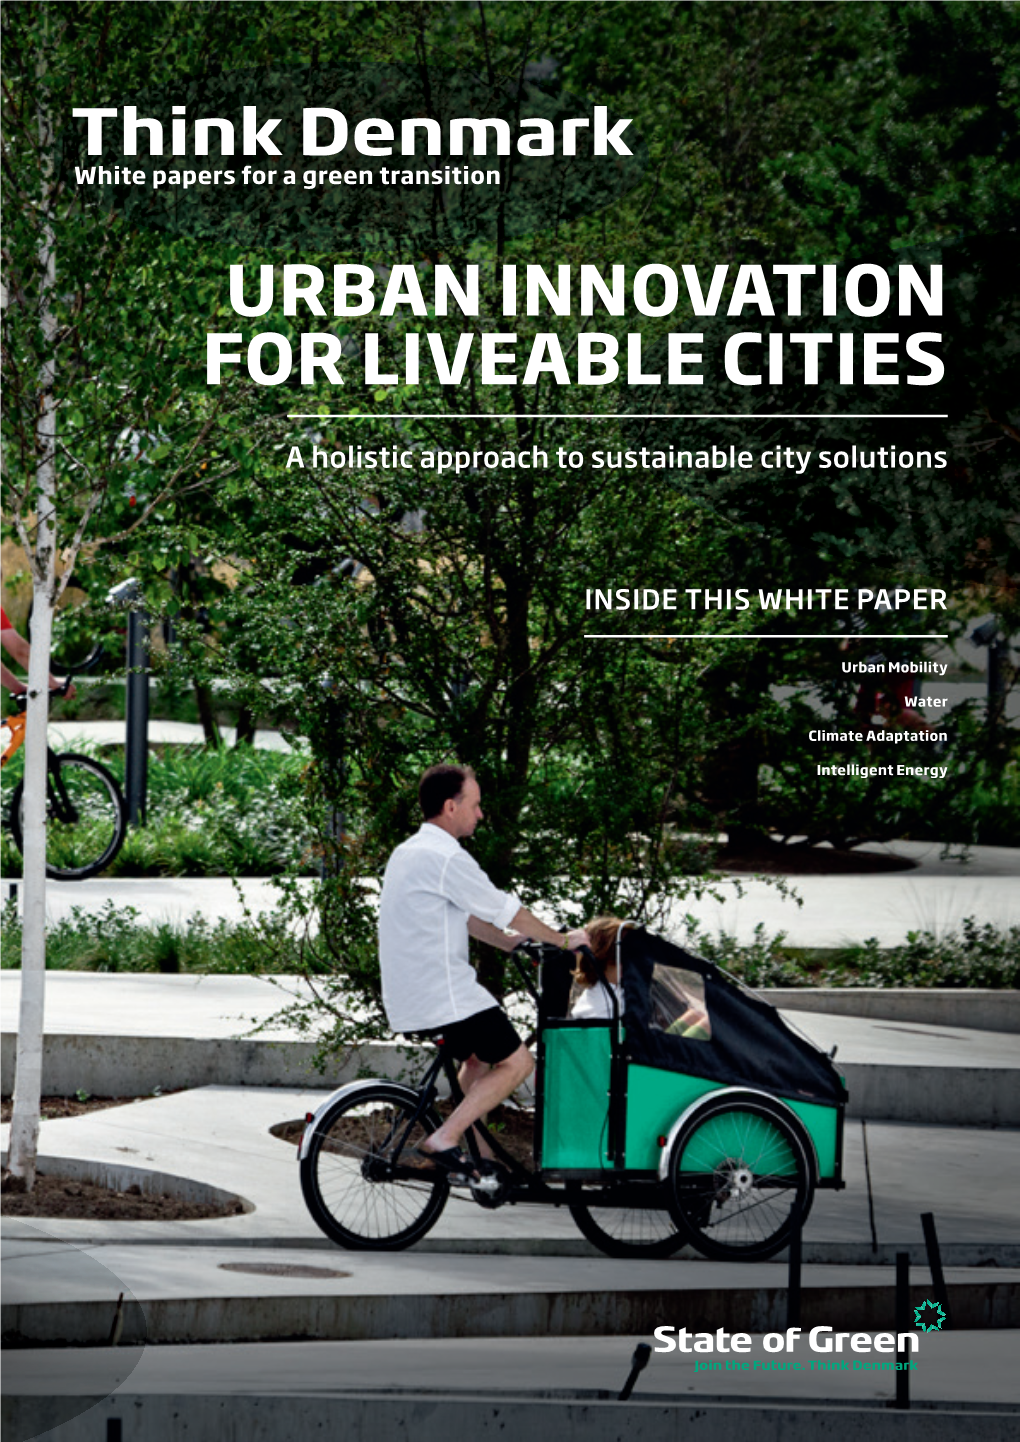 Urban Innovation for Liveable Cities